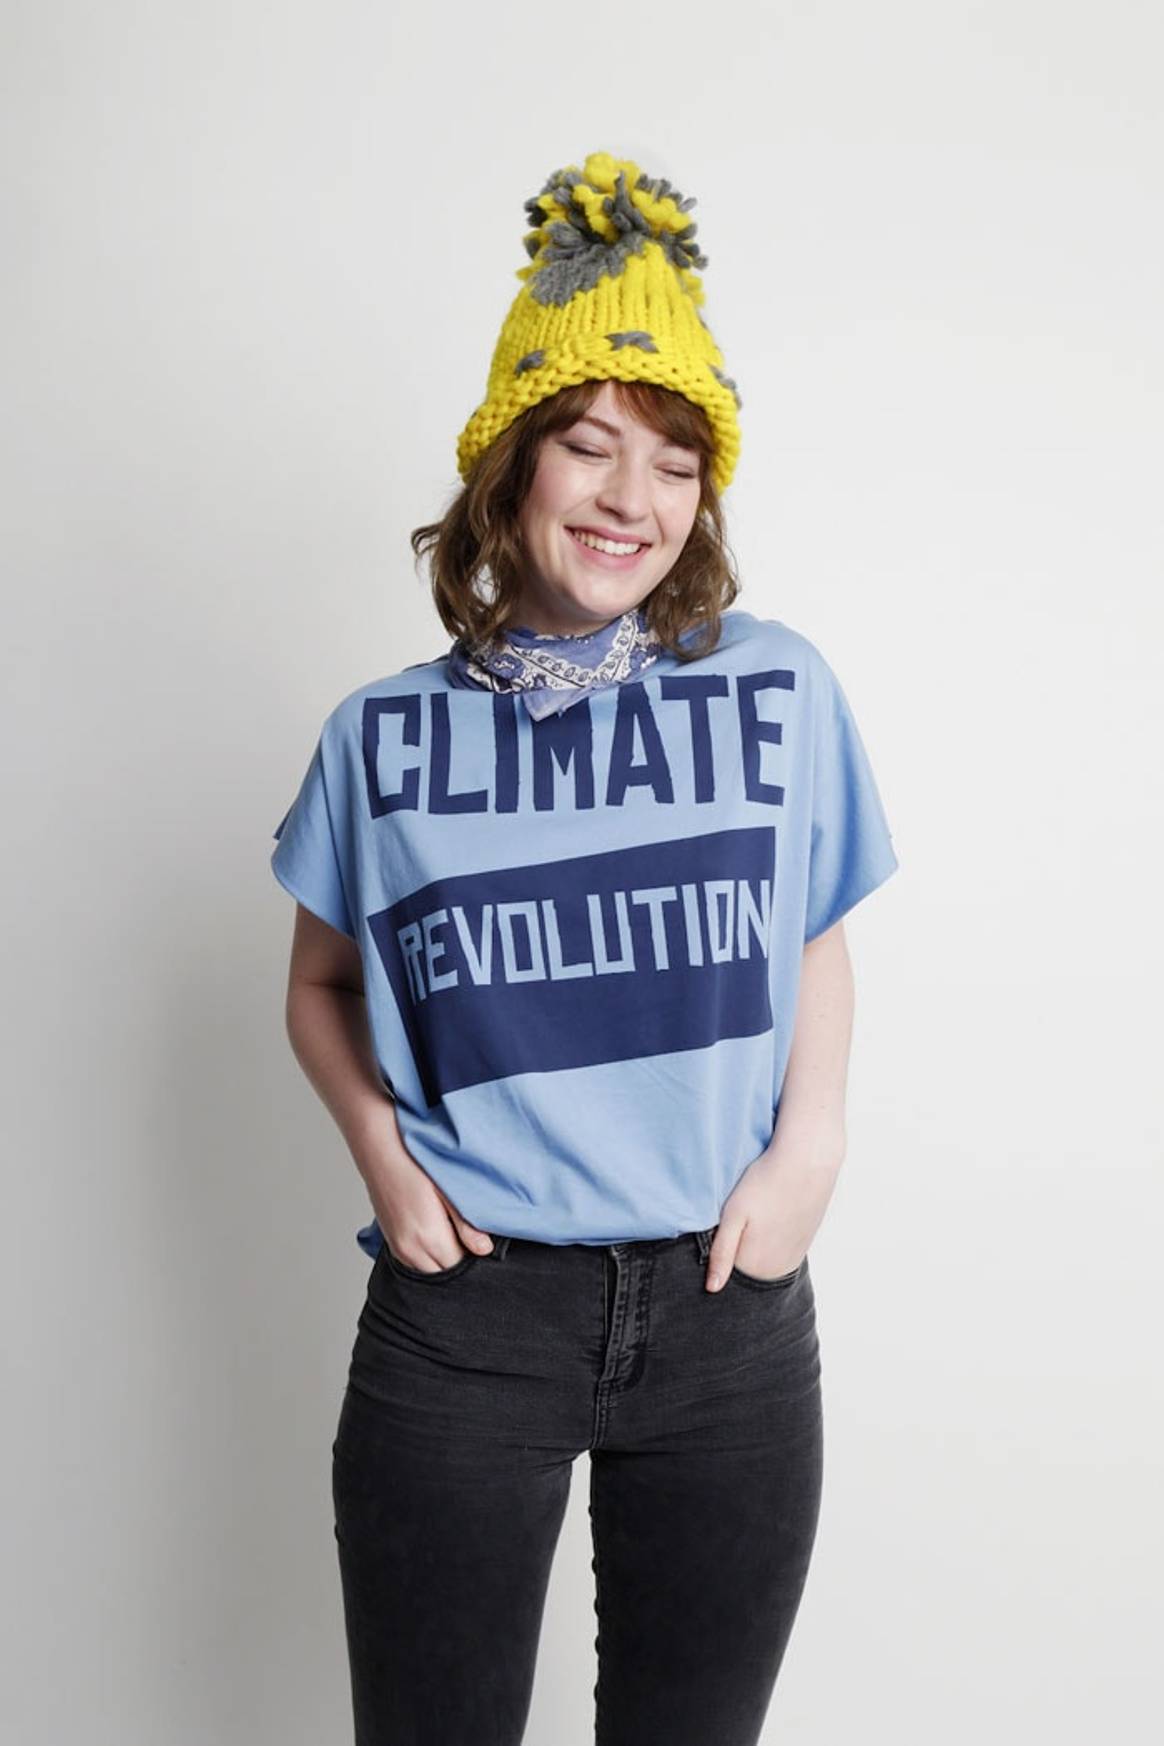 Wool and the Gang teams up with Climate Revolution